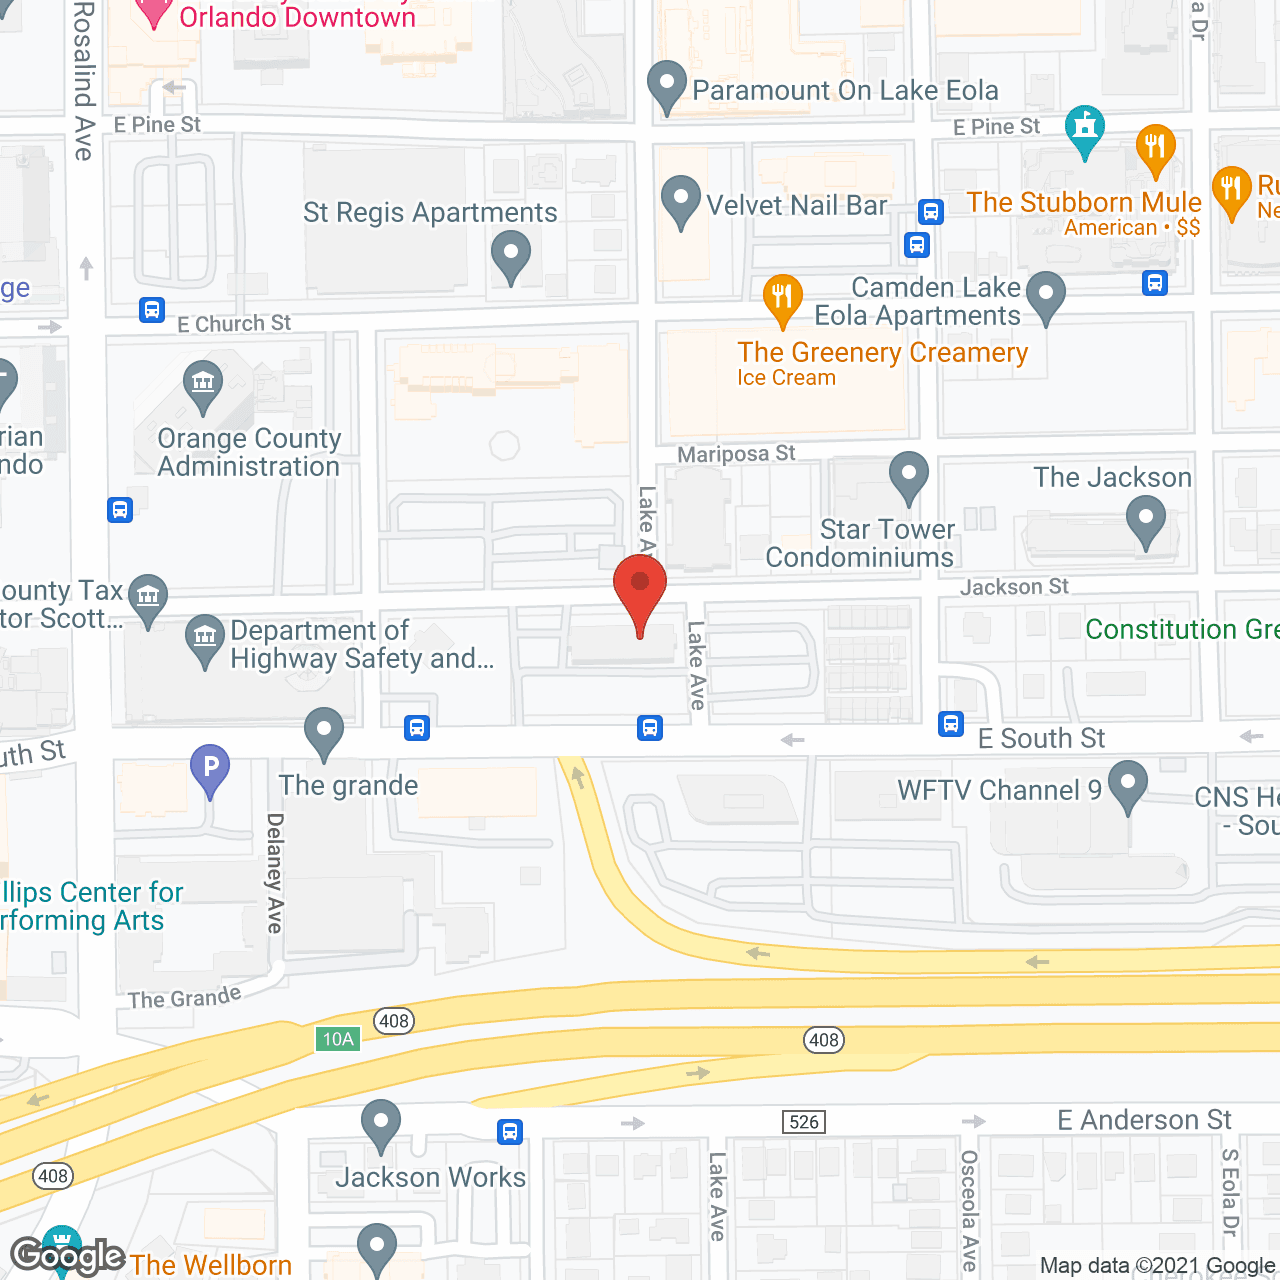 Orlando Central Towers Inc in google map